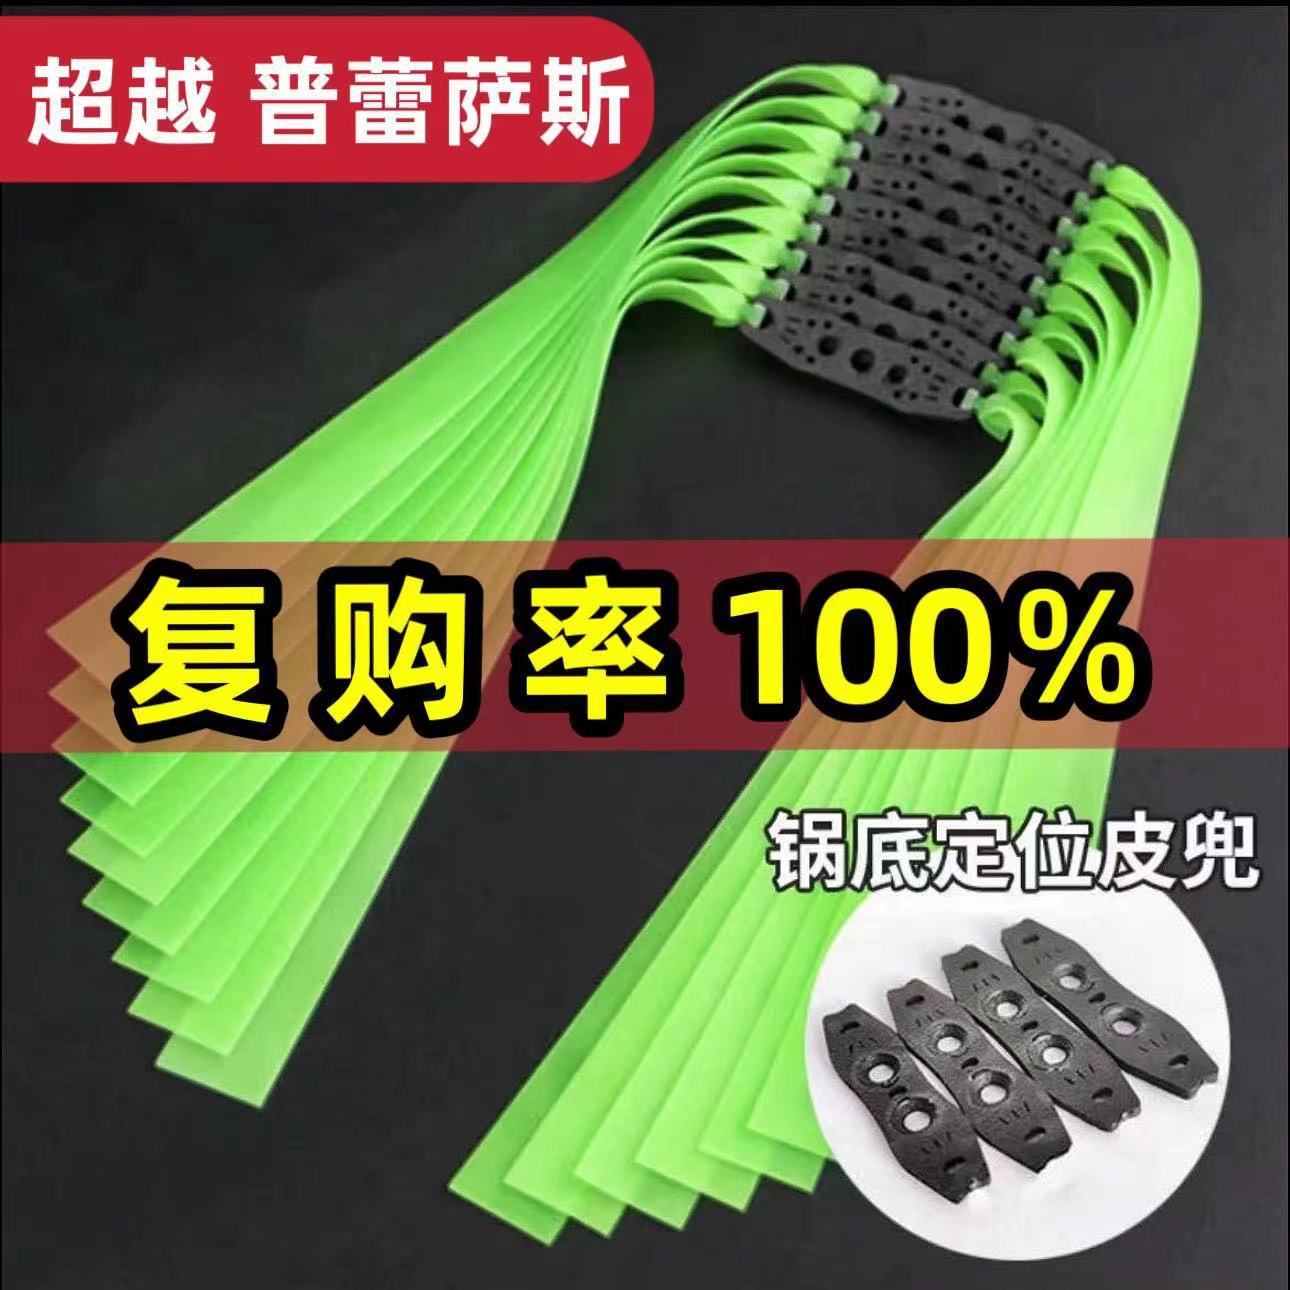 Flat Rubber Band Competitive Leather Slingshot Latex Wholesale Tape Measure Taper Cutting Rubber Band with Frame without Frame Outdoor Flat Rubber Band Sets